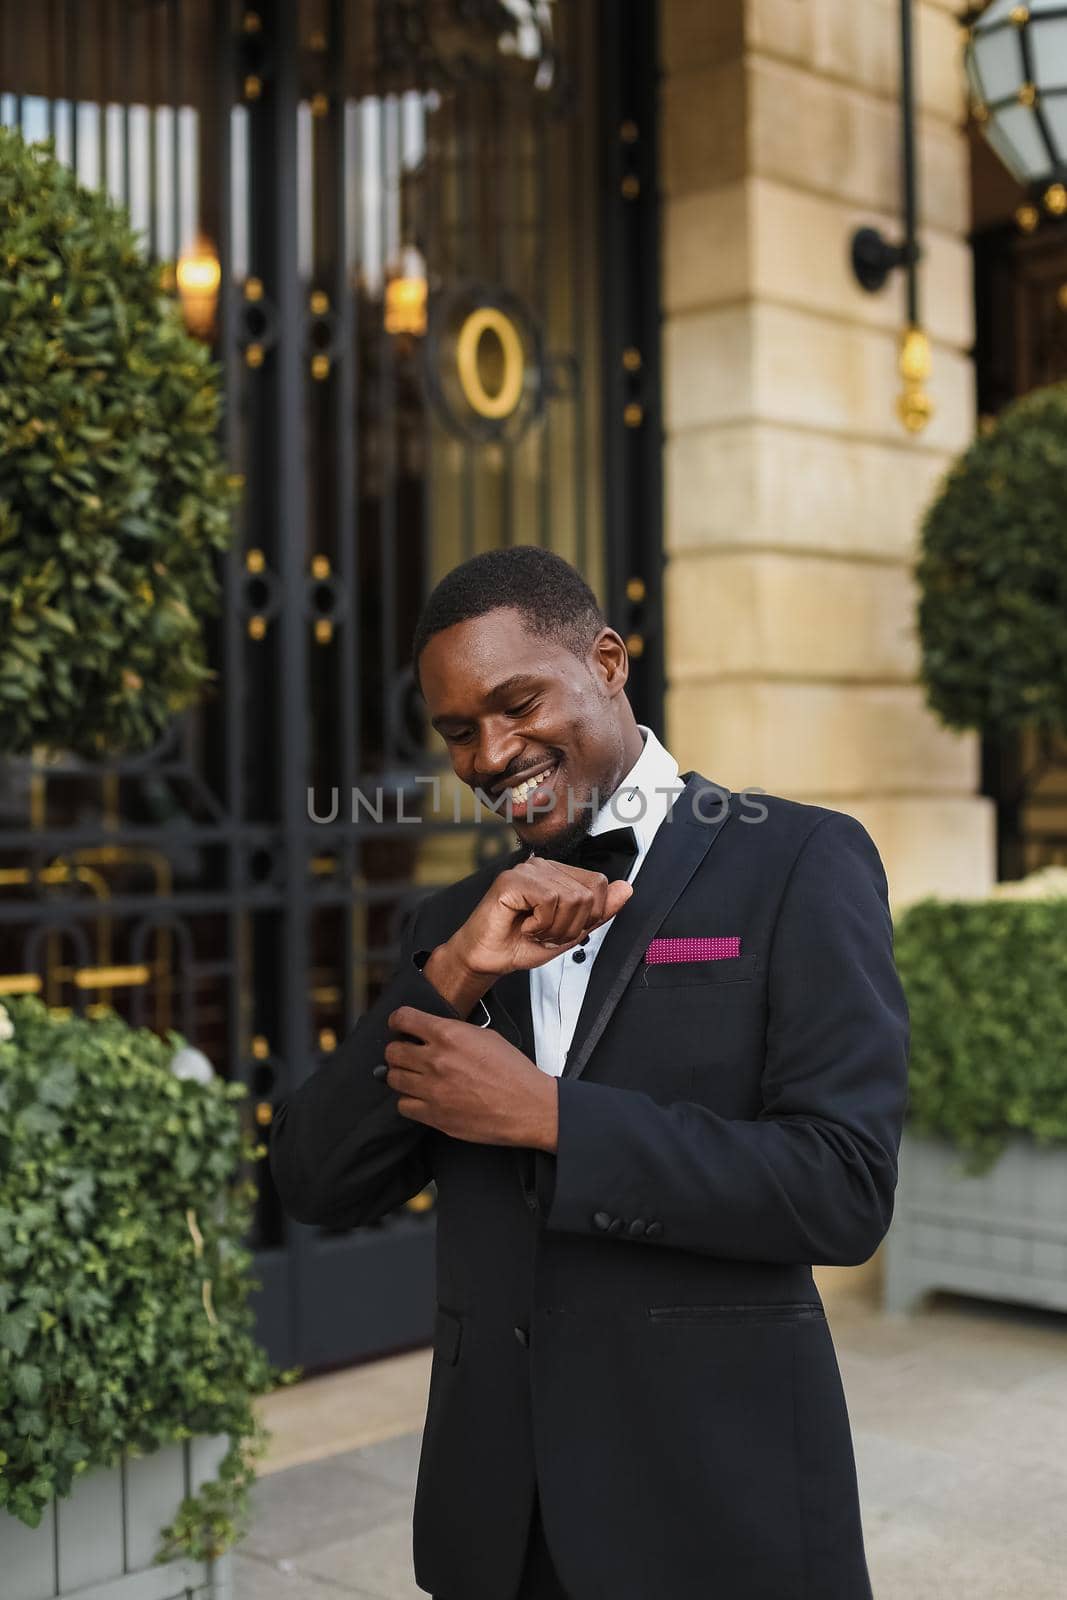 Afro american happy good looking man wearing suit and smiling outdoors. Concept of black businessman.